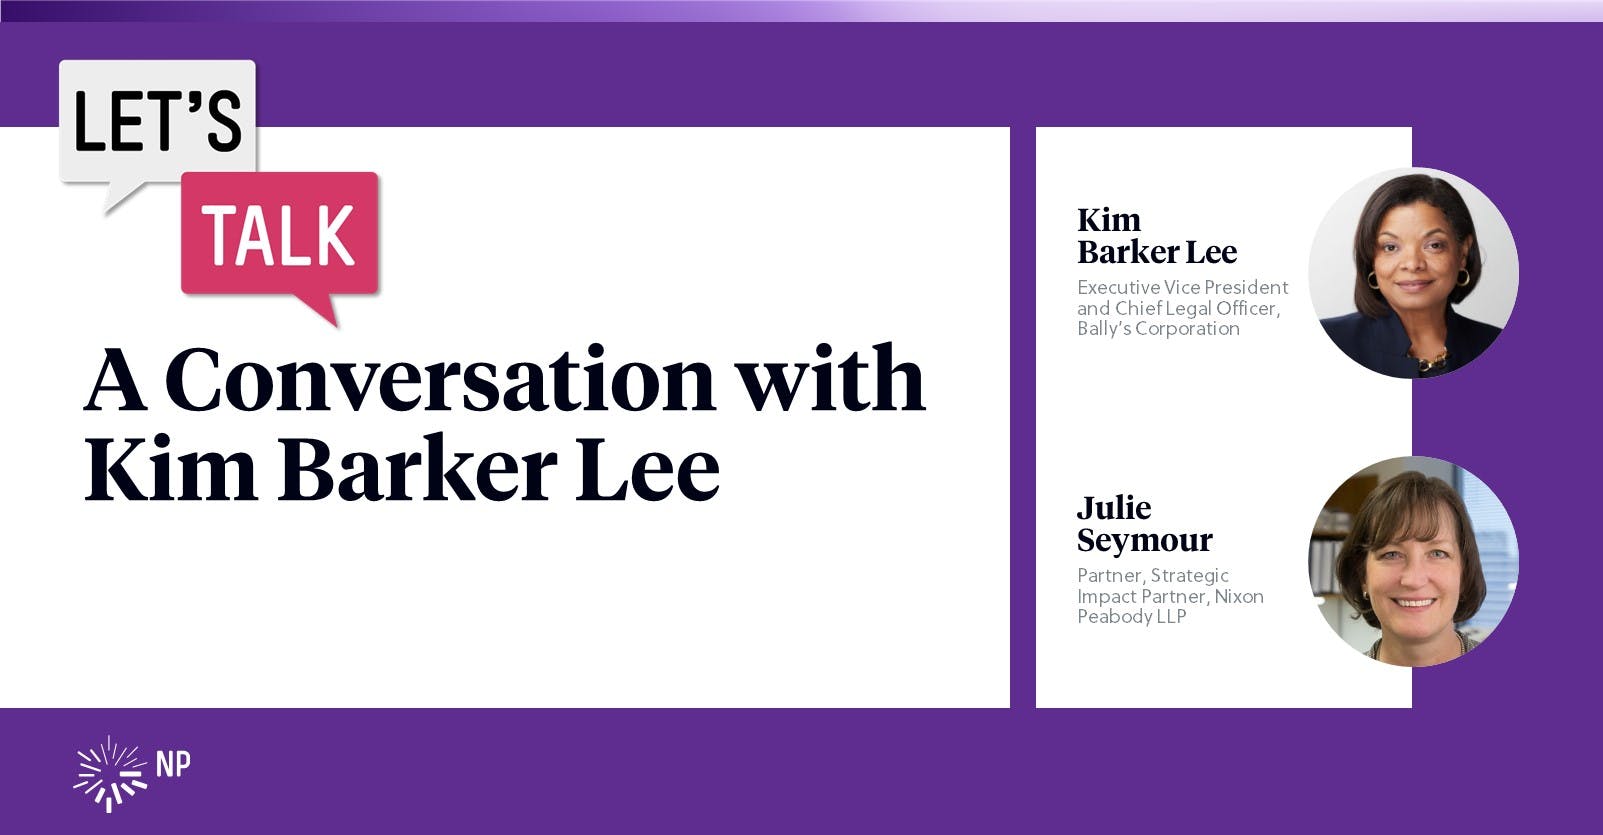 Let's Talk! A conversation with Kim Barker Lee